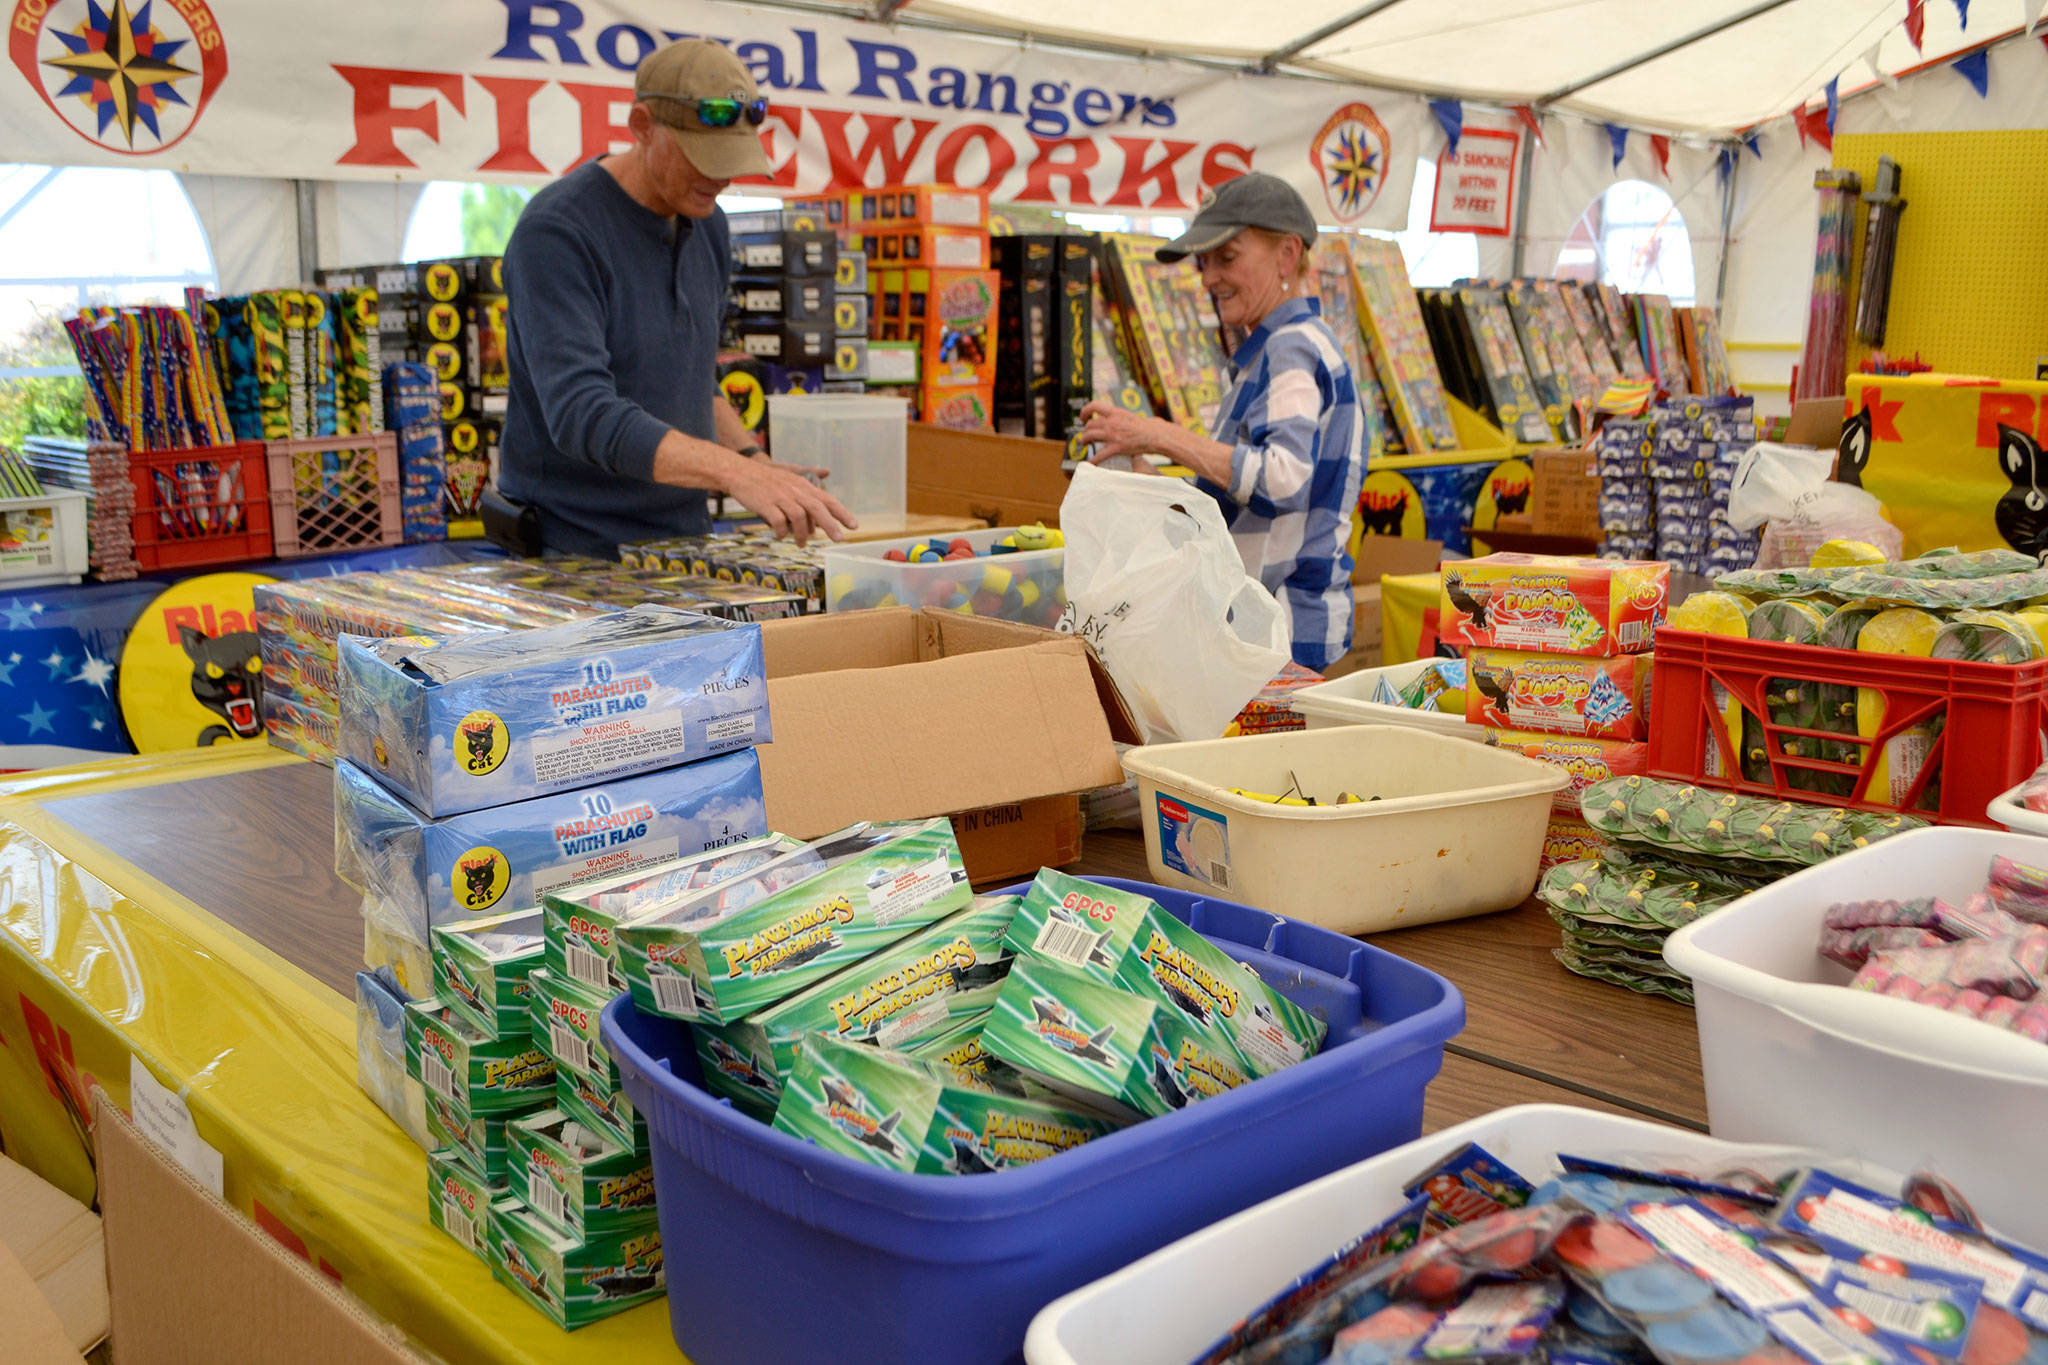 Terry and Sam Marsh, members of Sequim Worship Center, help set up the Royal Rangers fireworks booth on June 27 near Sequim JCPenney. It is one of four booths in Sequim city limits selling fireworks from June 28-July 5. Next year, the City of Sequim’s ban on discharing consumer fireworks is implemented but booth sales will continue. Sequim Gazette photo by Matthew Nash